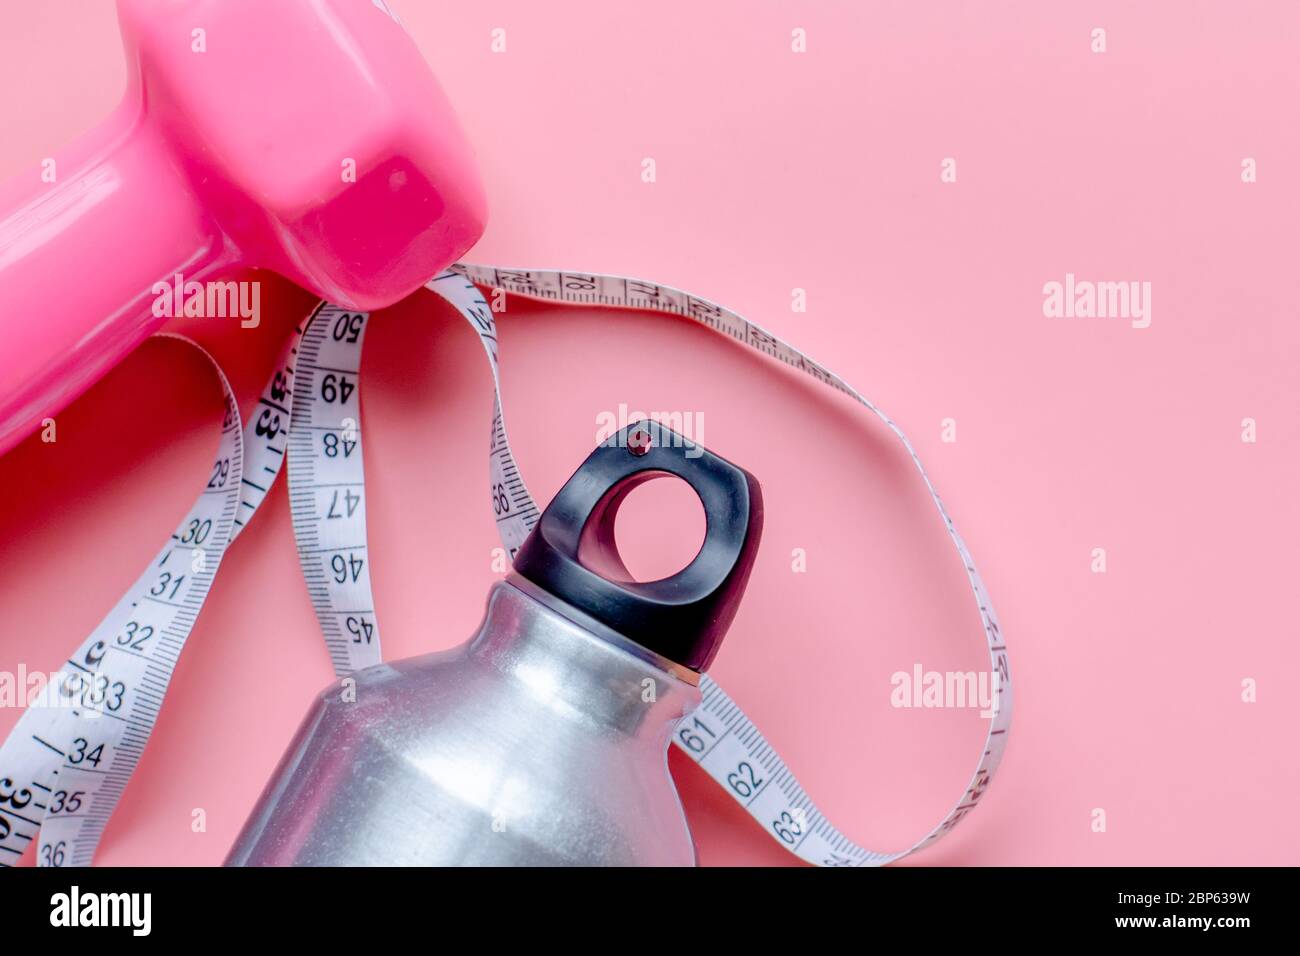 pink color dumbbell, exercise mat and water bottle on white background  4641777 Stock Photo at Vecteezy